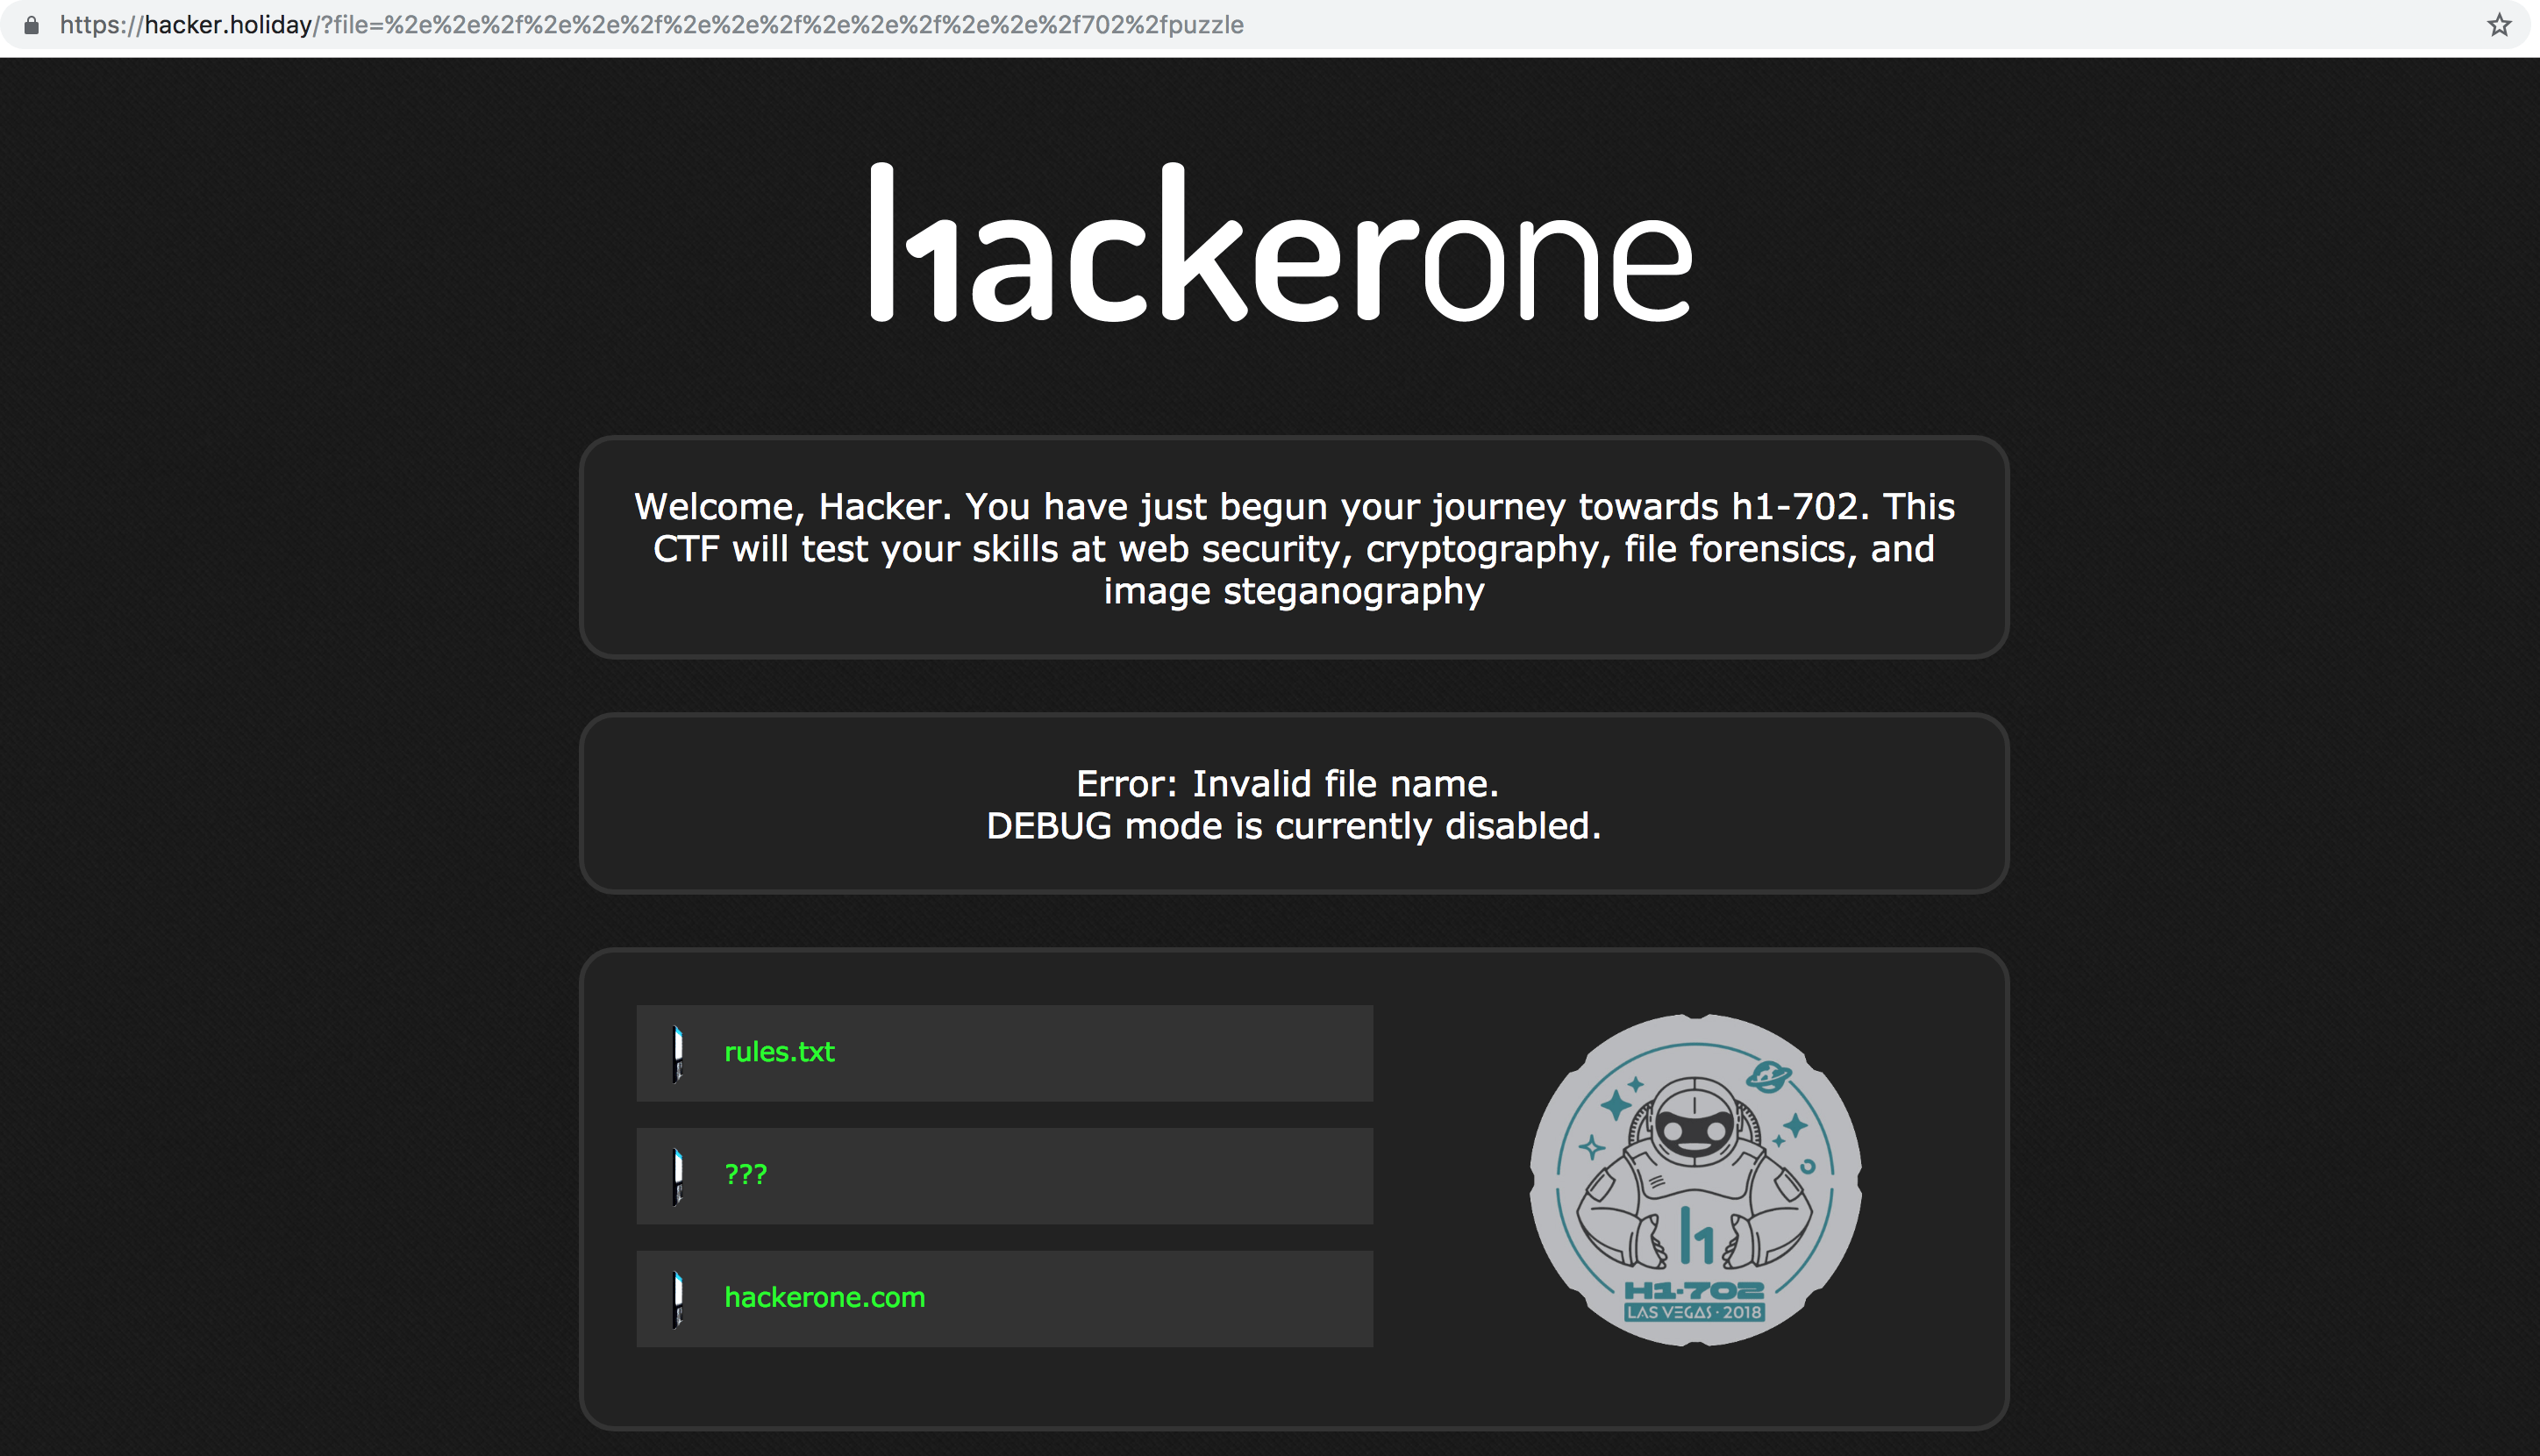 HackerOne - h1702 #HackerHoliday Web Attempt at directory traversal with file